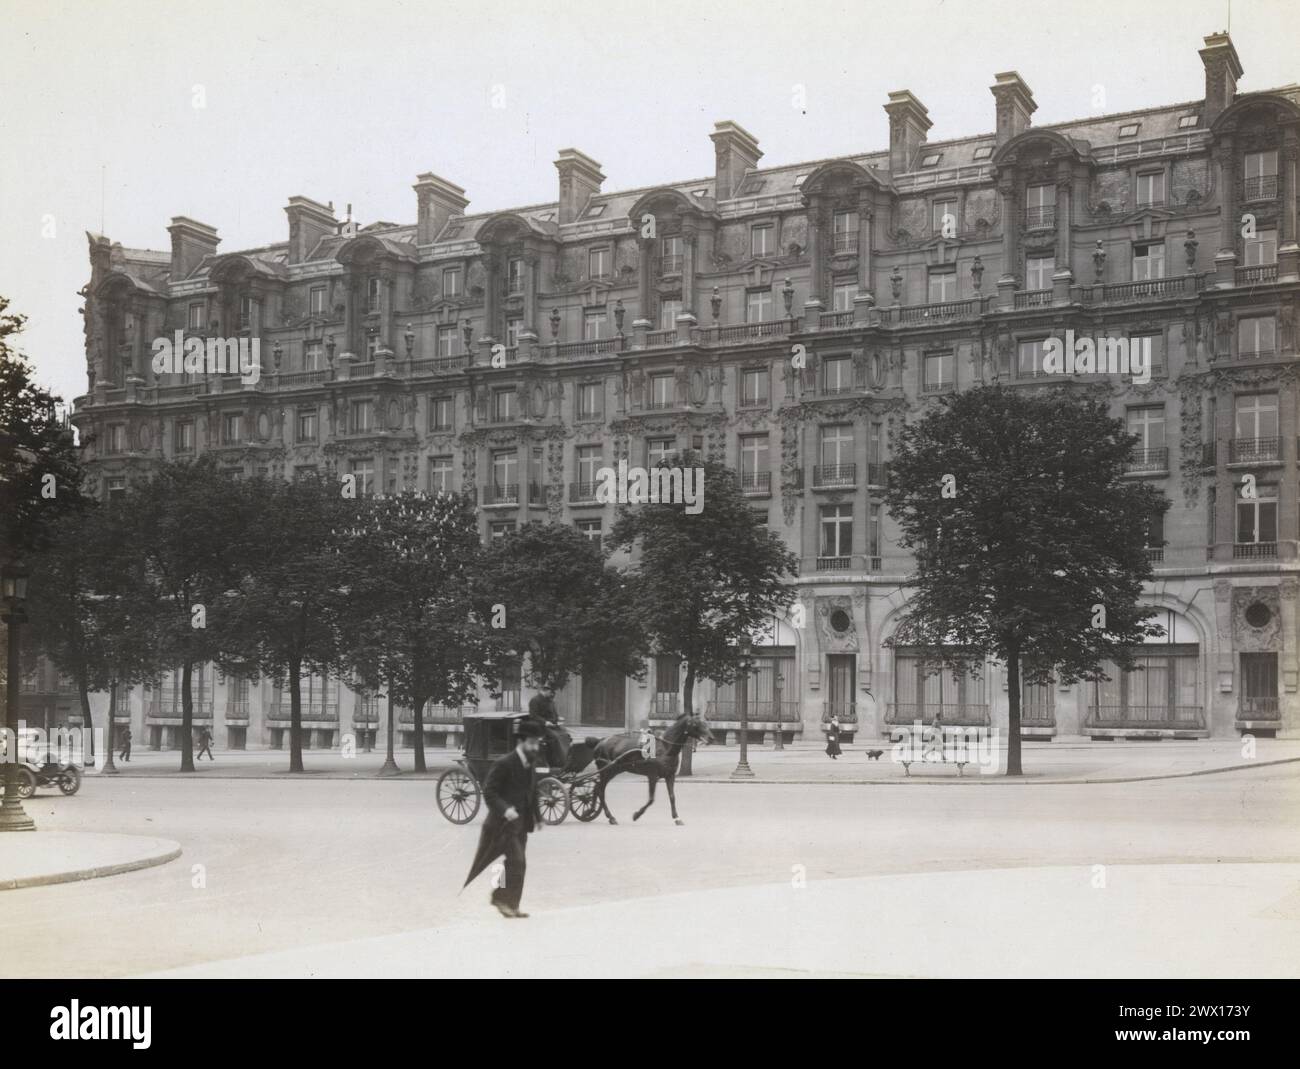 Elysee Palace Hotel, front view from the Avenue des Champs Elysees, Paris France ca. 1918 Stock Photo